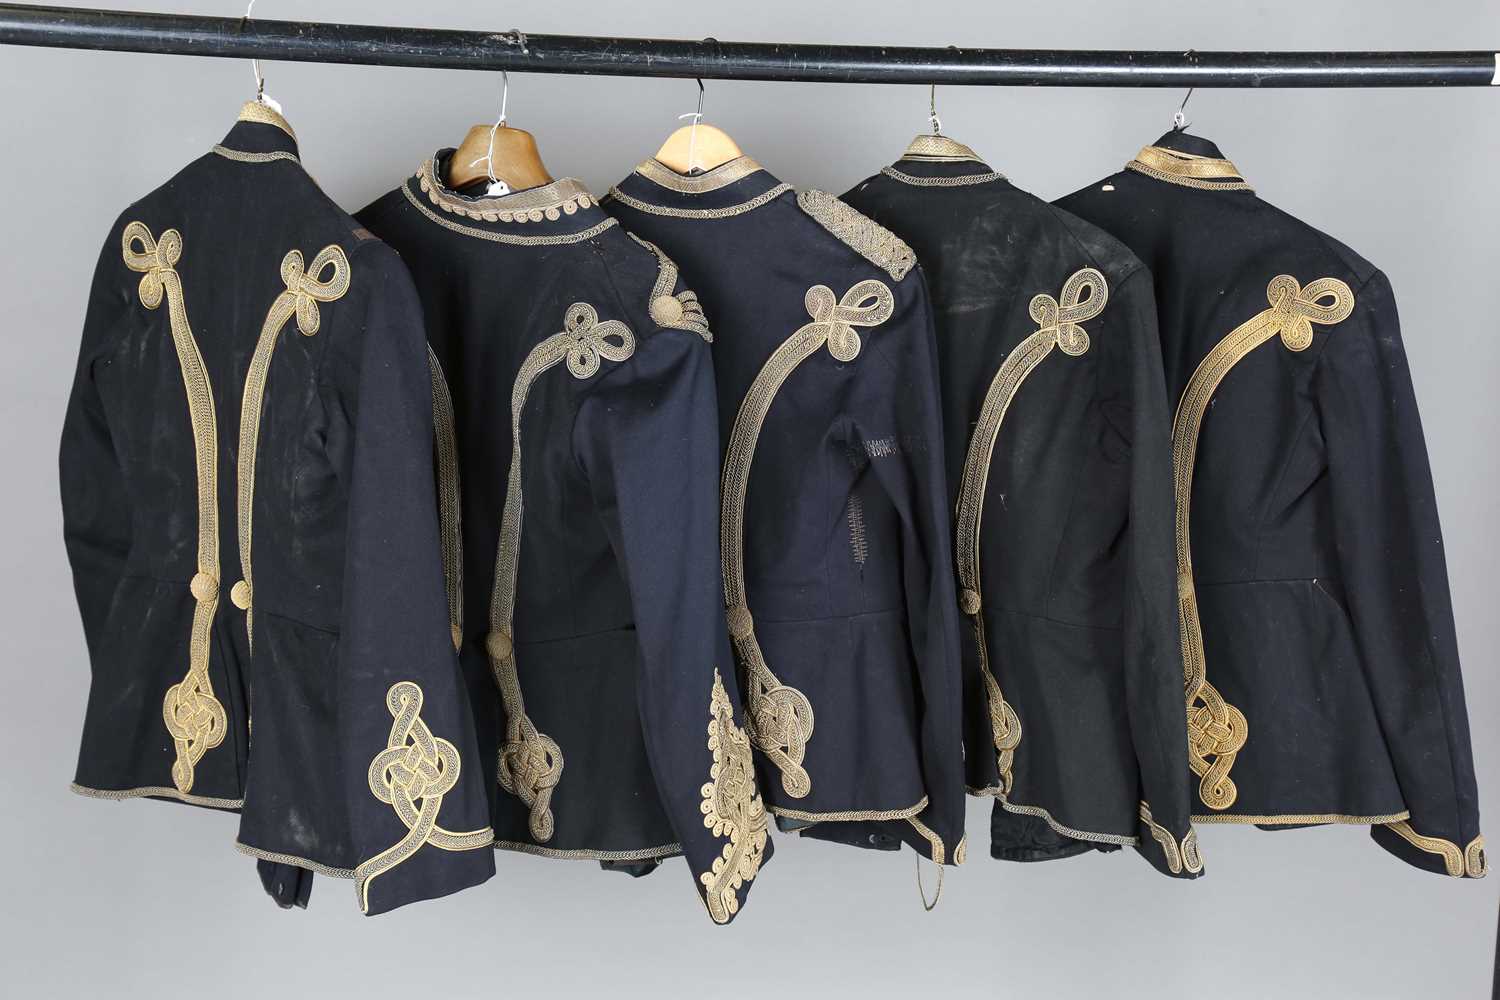 A group of early 20th century officer's dress tunics with bullion-embroidered decoration and rank - Image 20 of 23